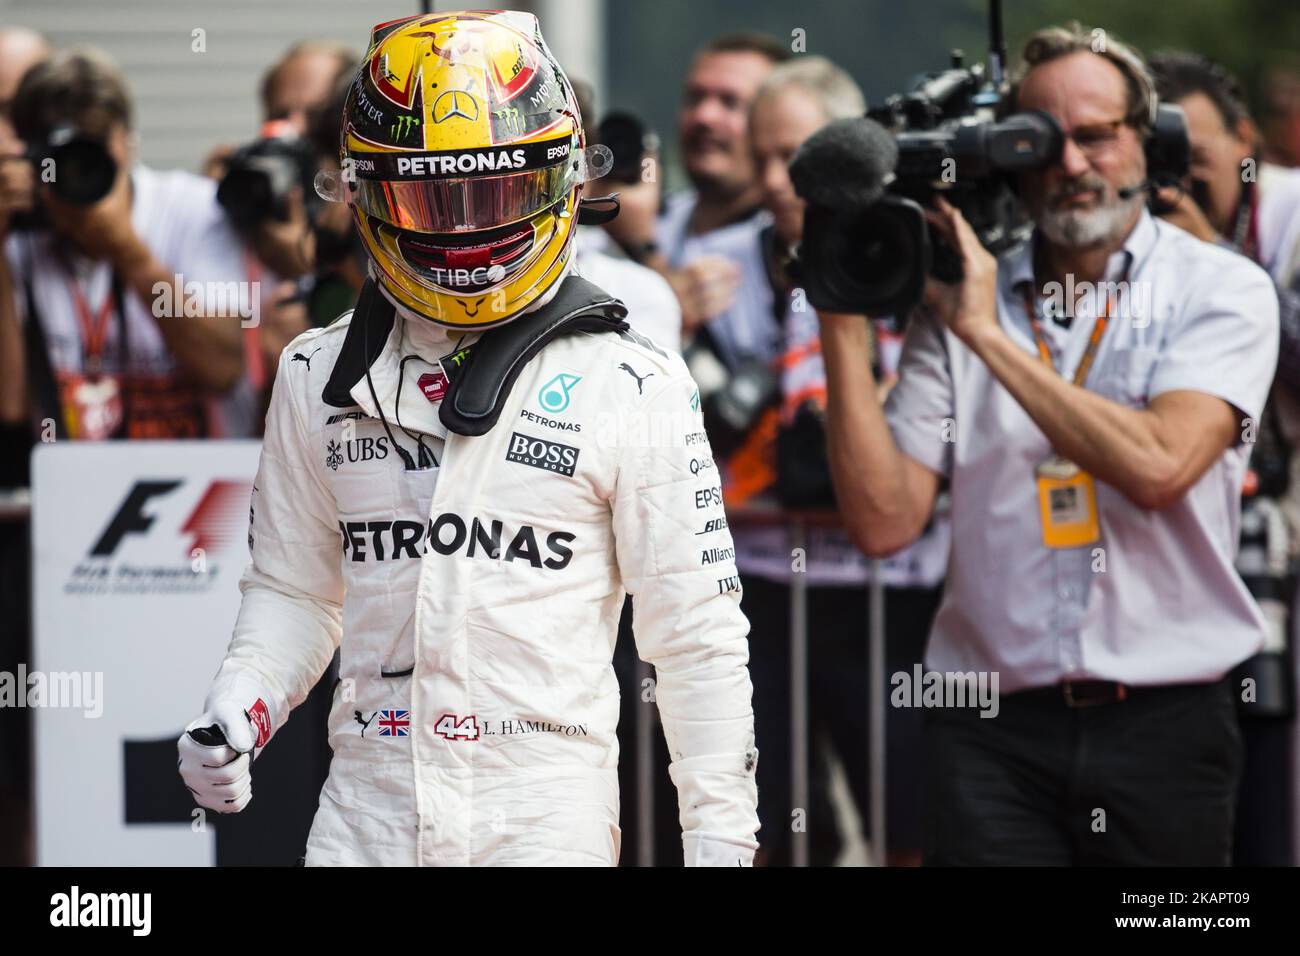 44 HAMILTON Lewis from Great Britain of team Mercedes GP celebrating his victory during the Formula One Belgian Grand Prix at Circuit de Spa-Francorchamps on August 27, 2017 in Spa, Belgium. (Photo by Xavier Bonilla/NurPhoto) Stock Photo